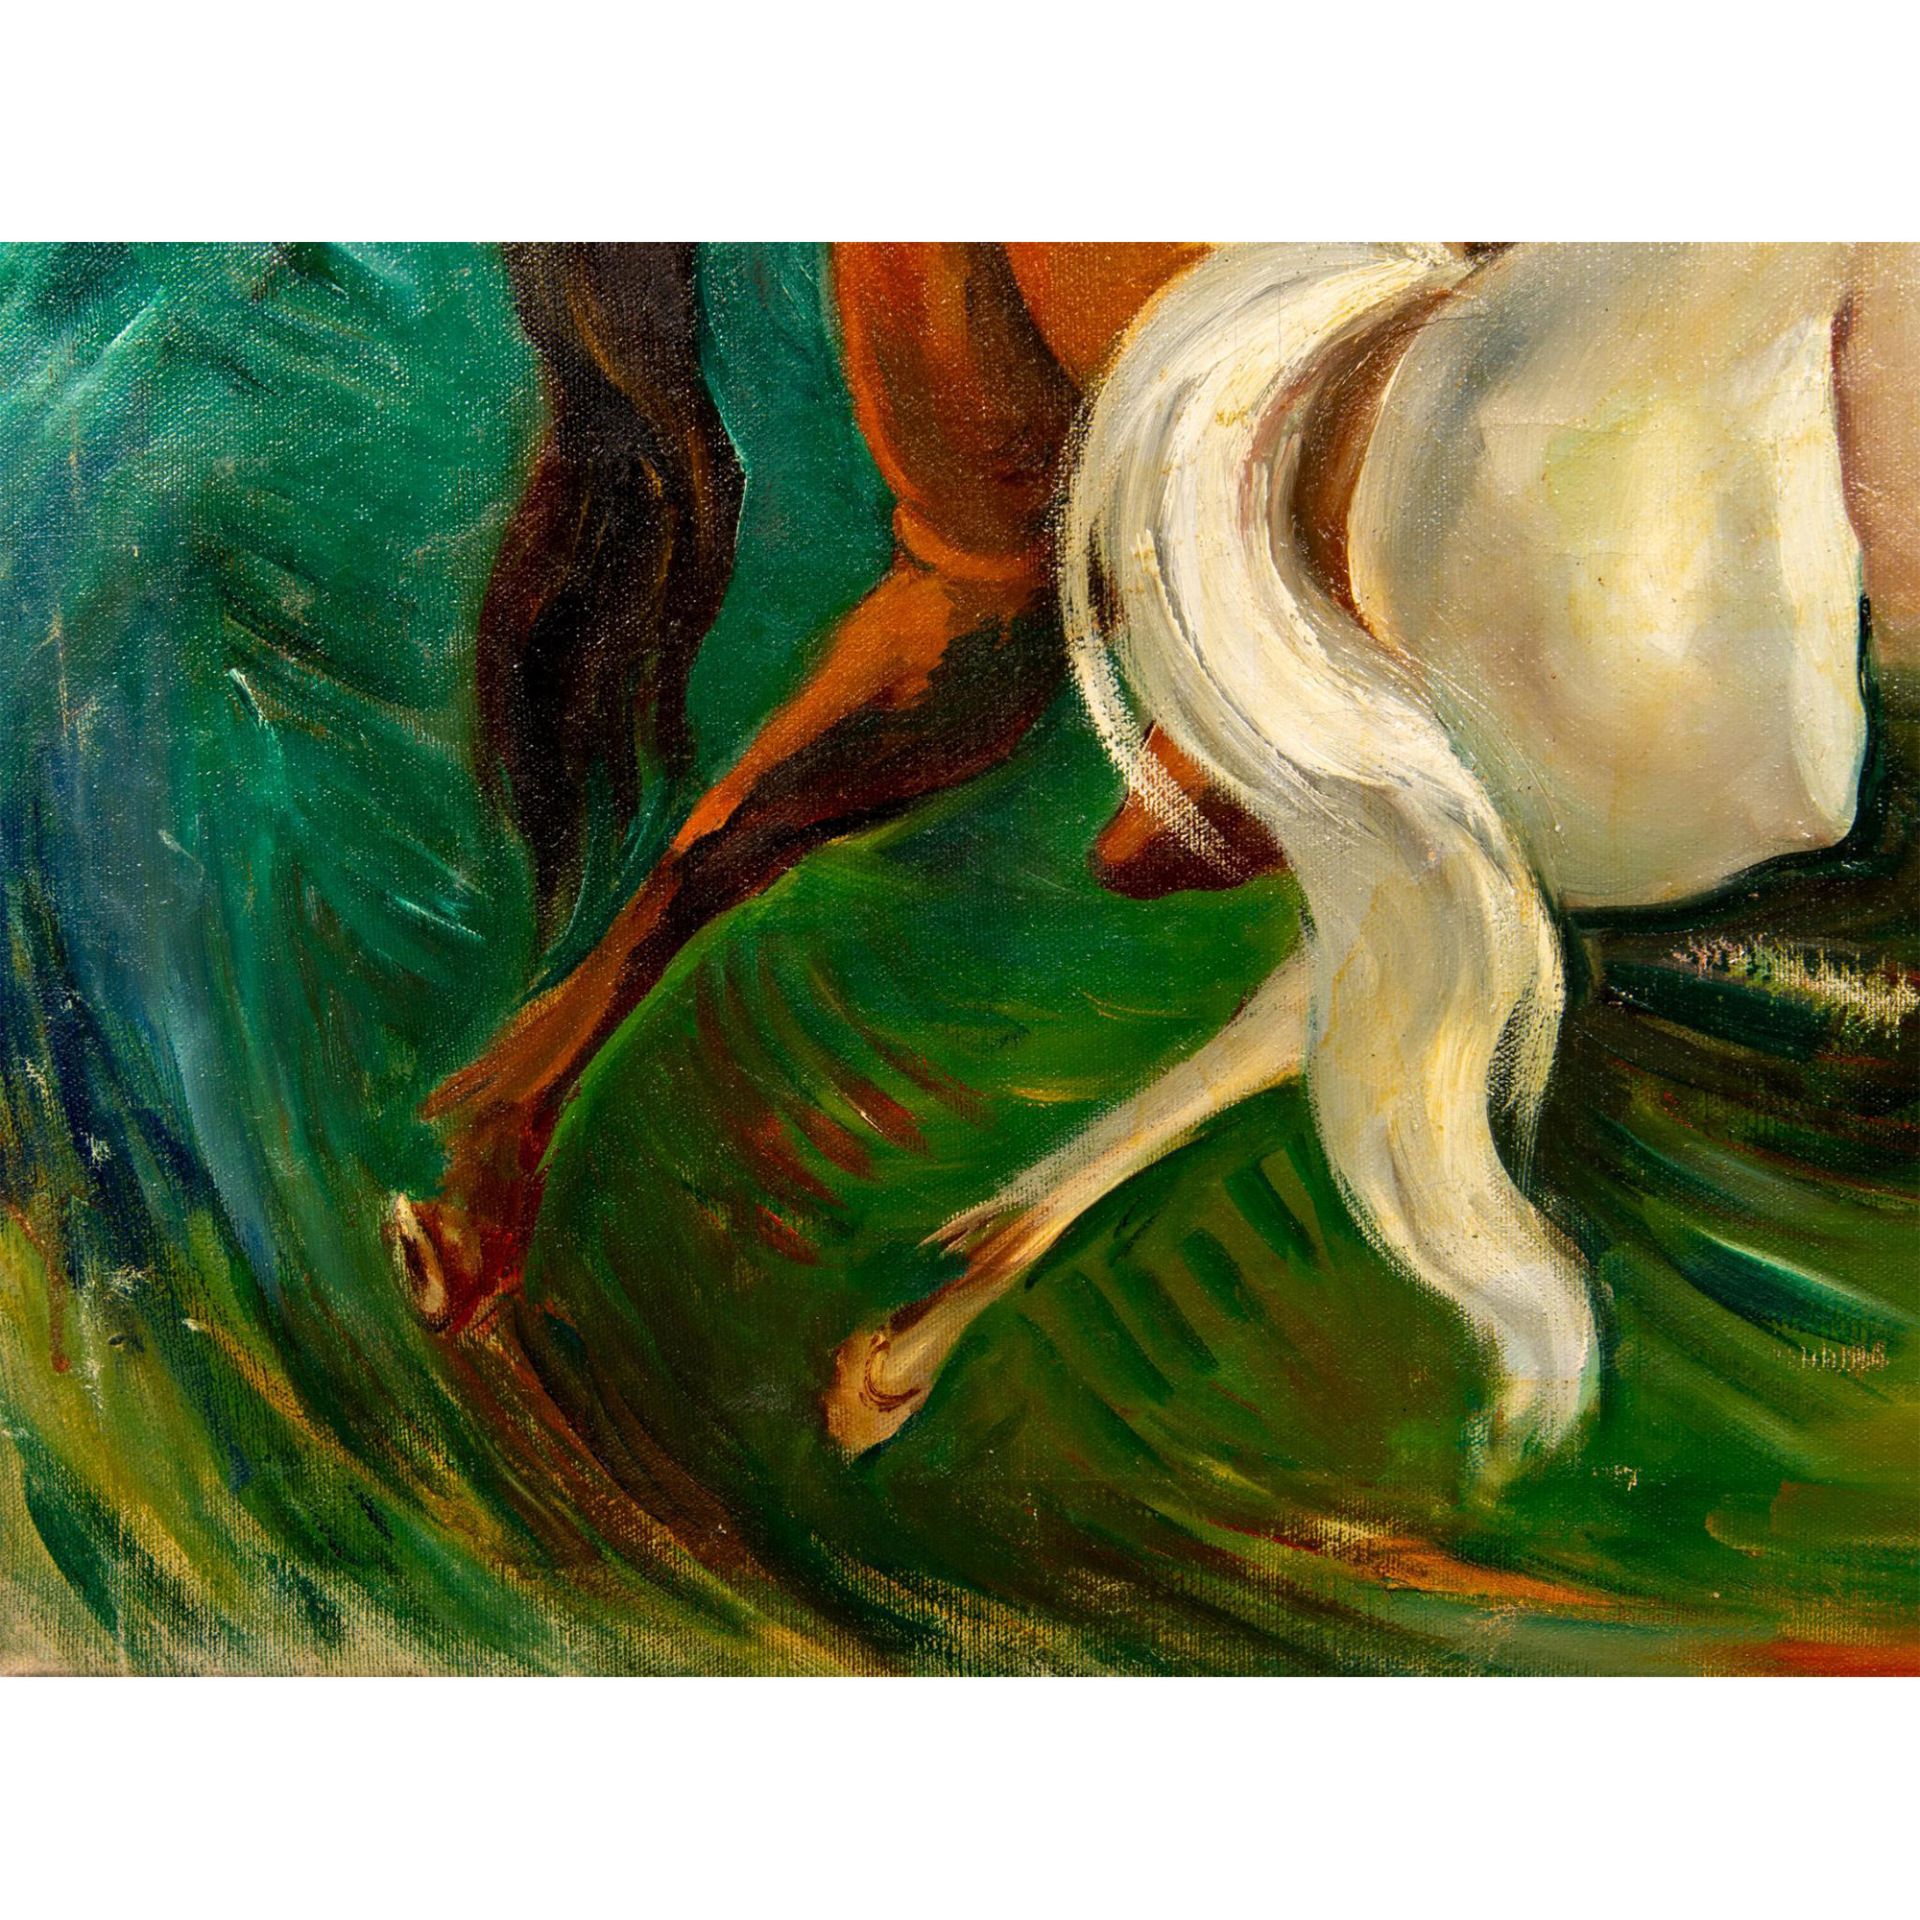 Original Oil on Canvas, Bareback Rider and Horses - Image 3 of 5